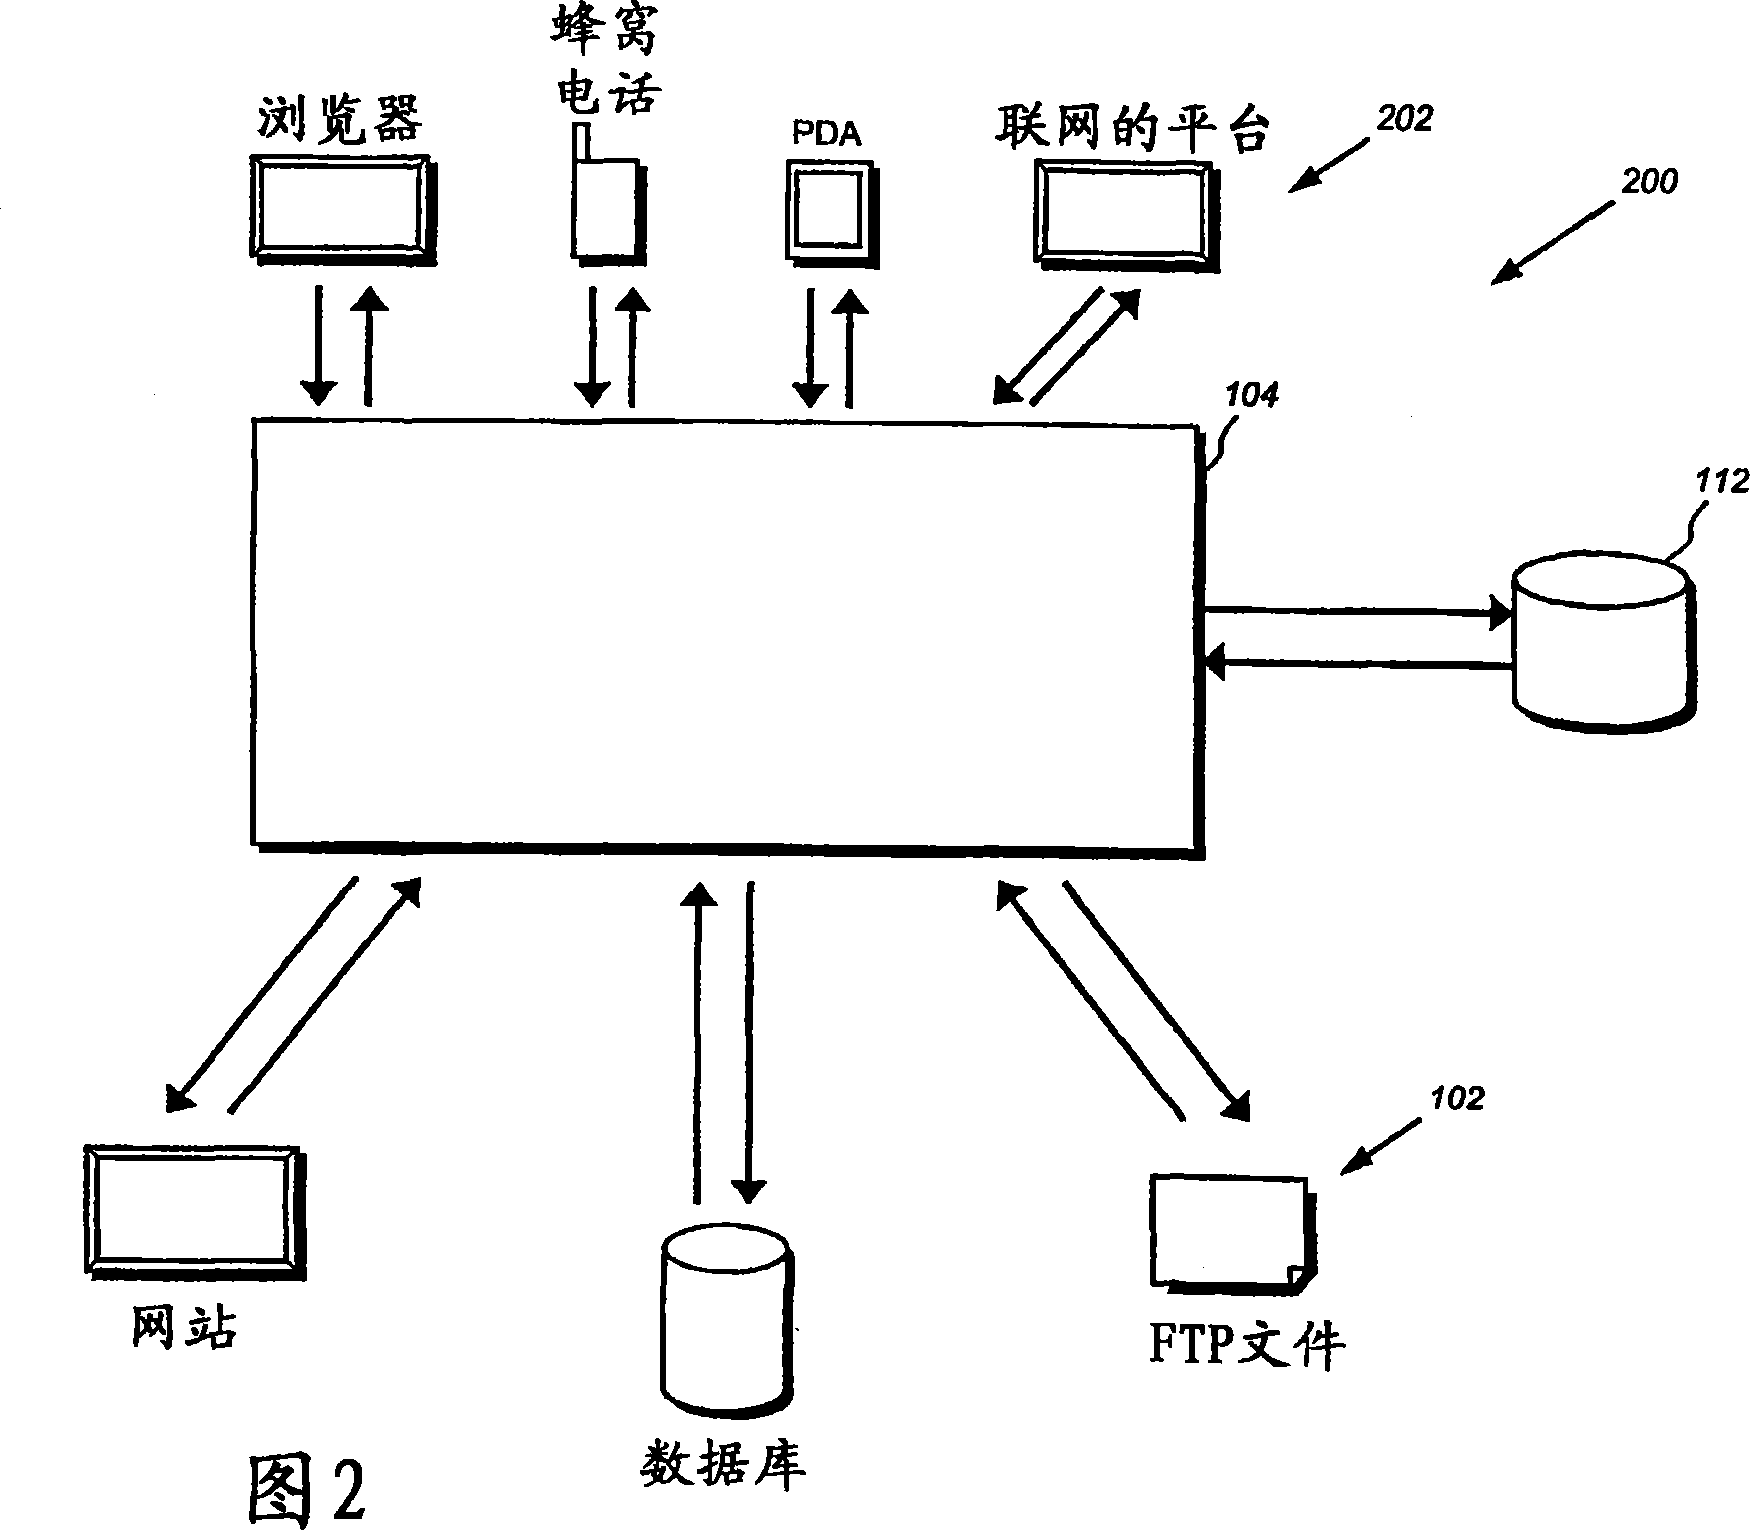 System structure for enterprise data integrated system